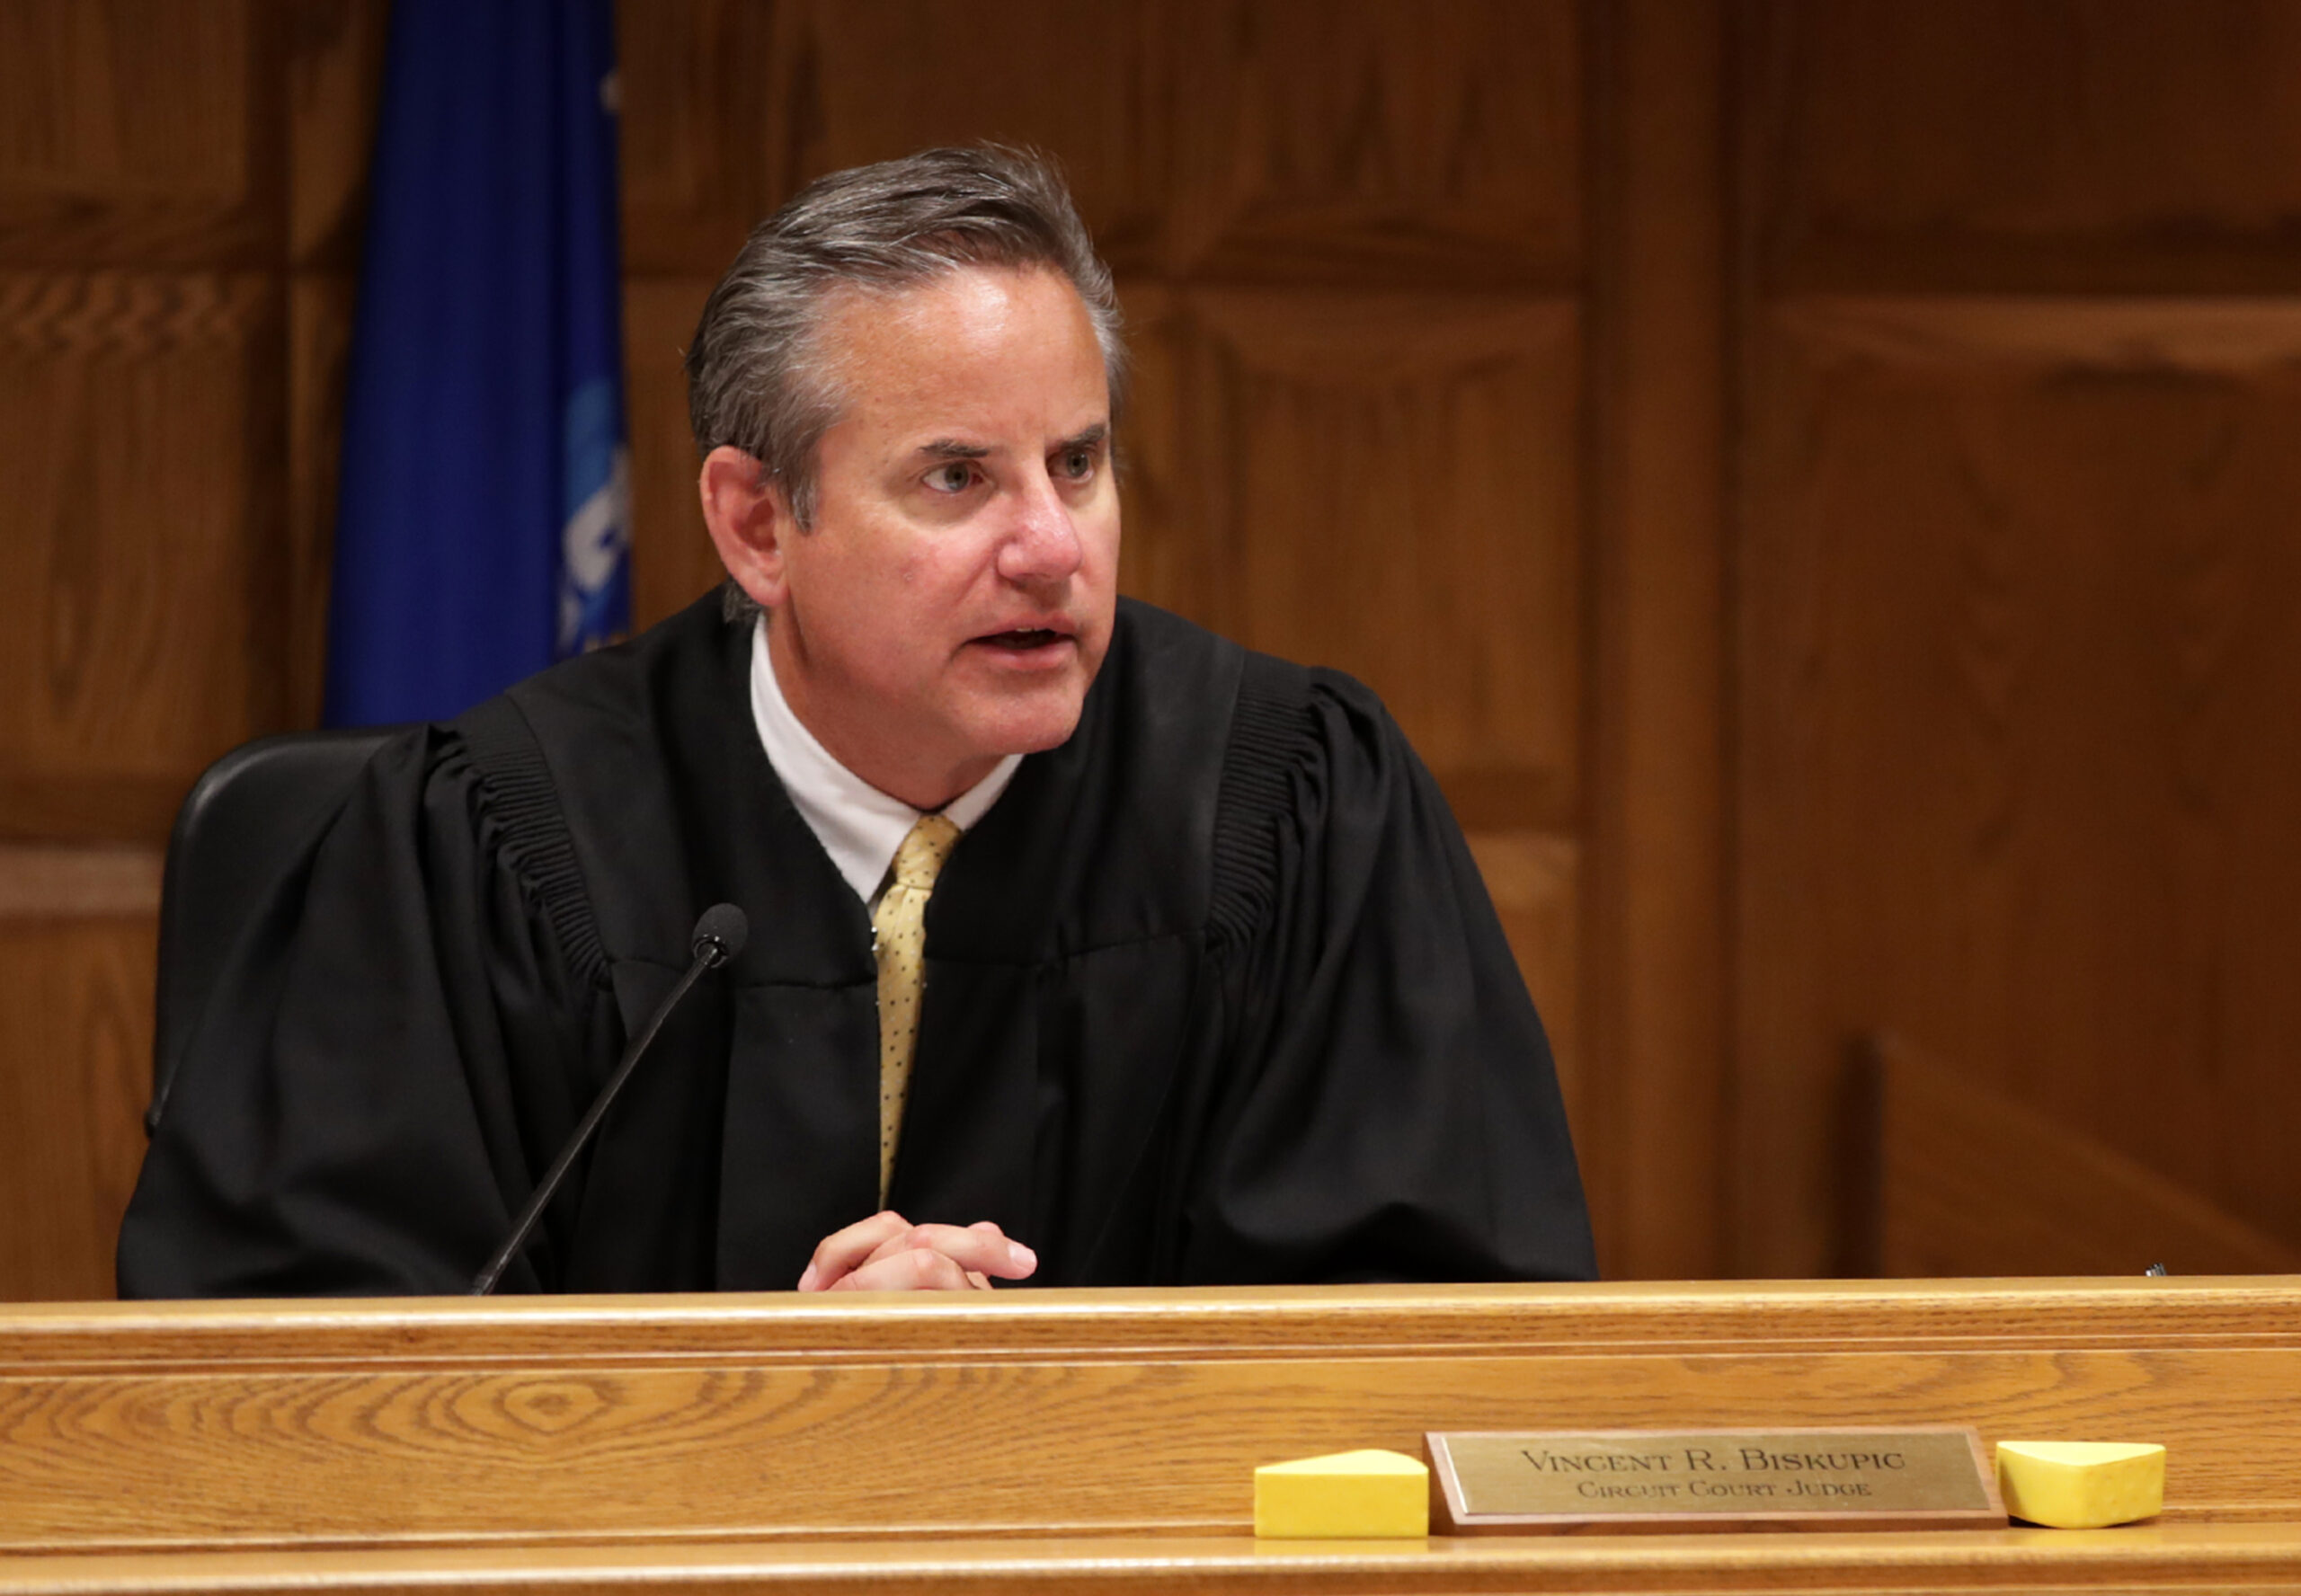 Transcript: Deals Vince Biskupic made as a prosecutor and judge raise questions of fairness in Wisconsin’s justice system